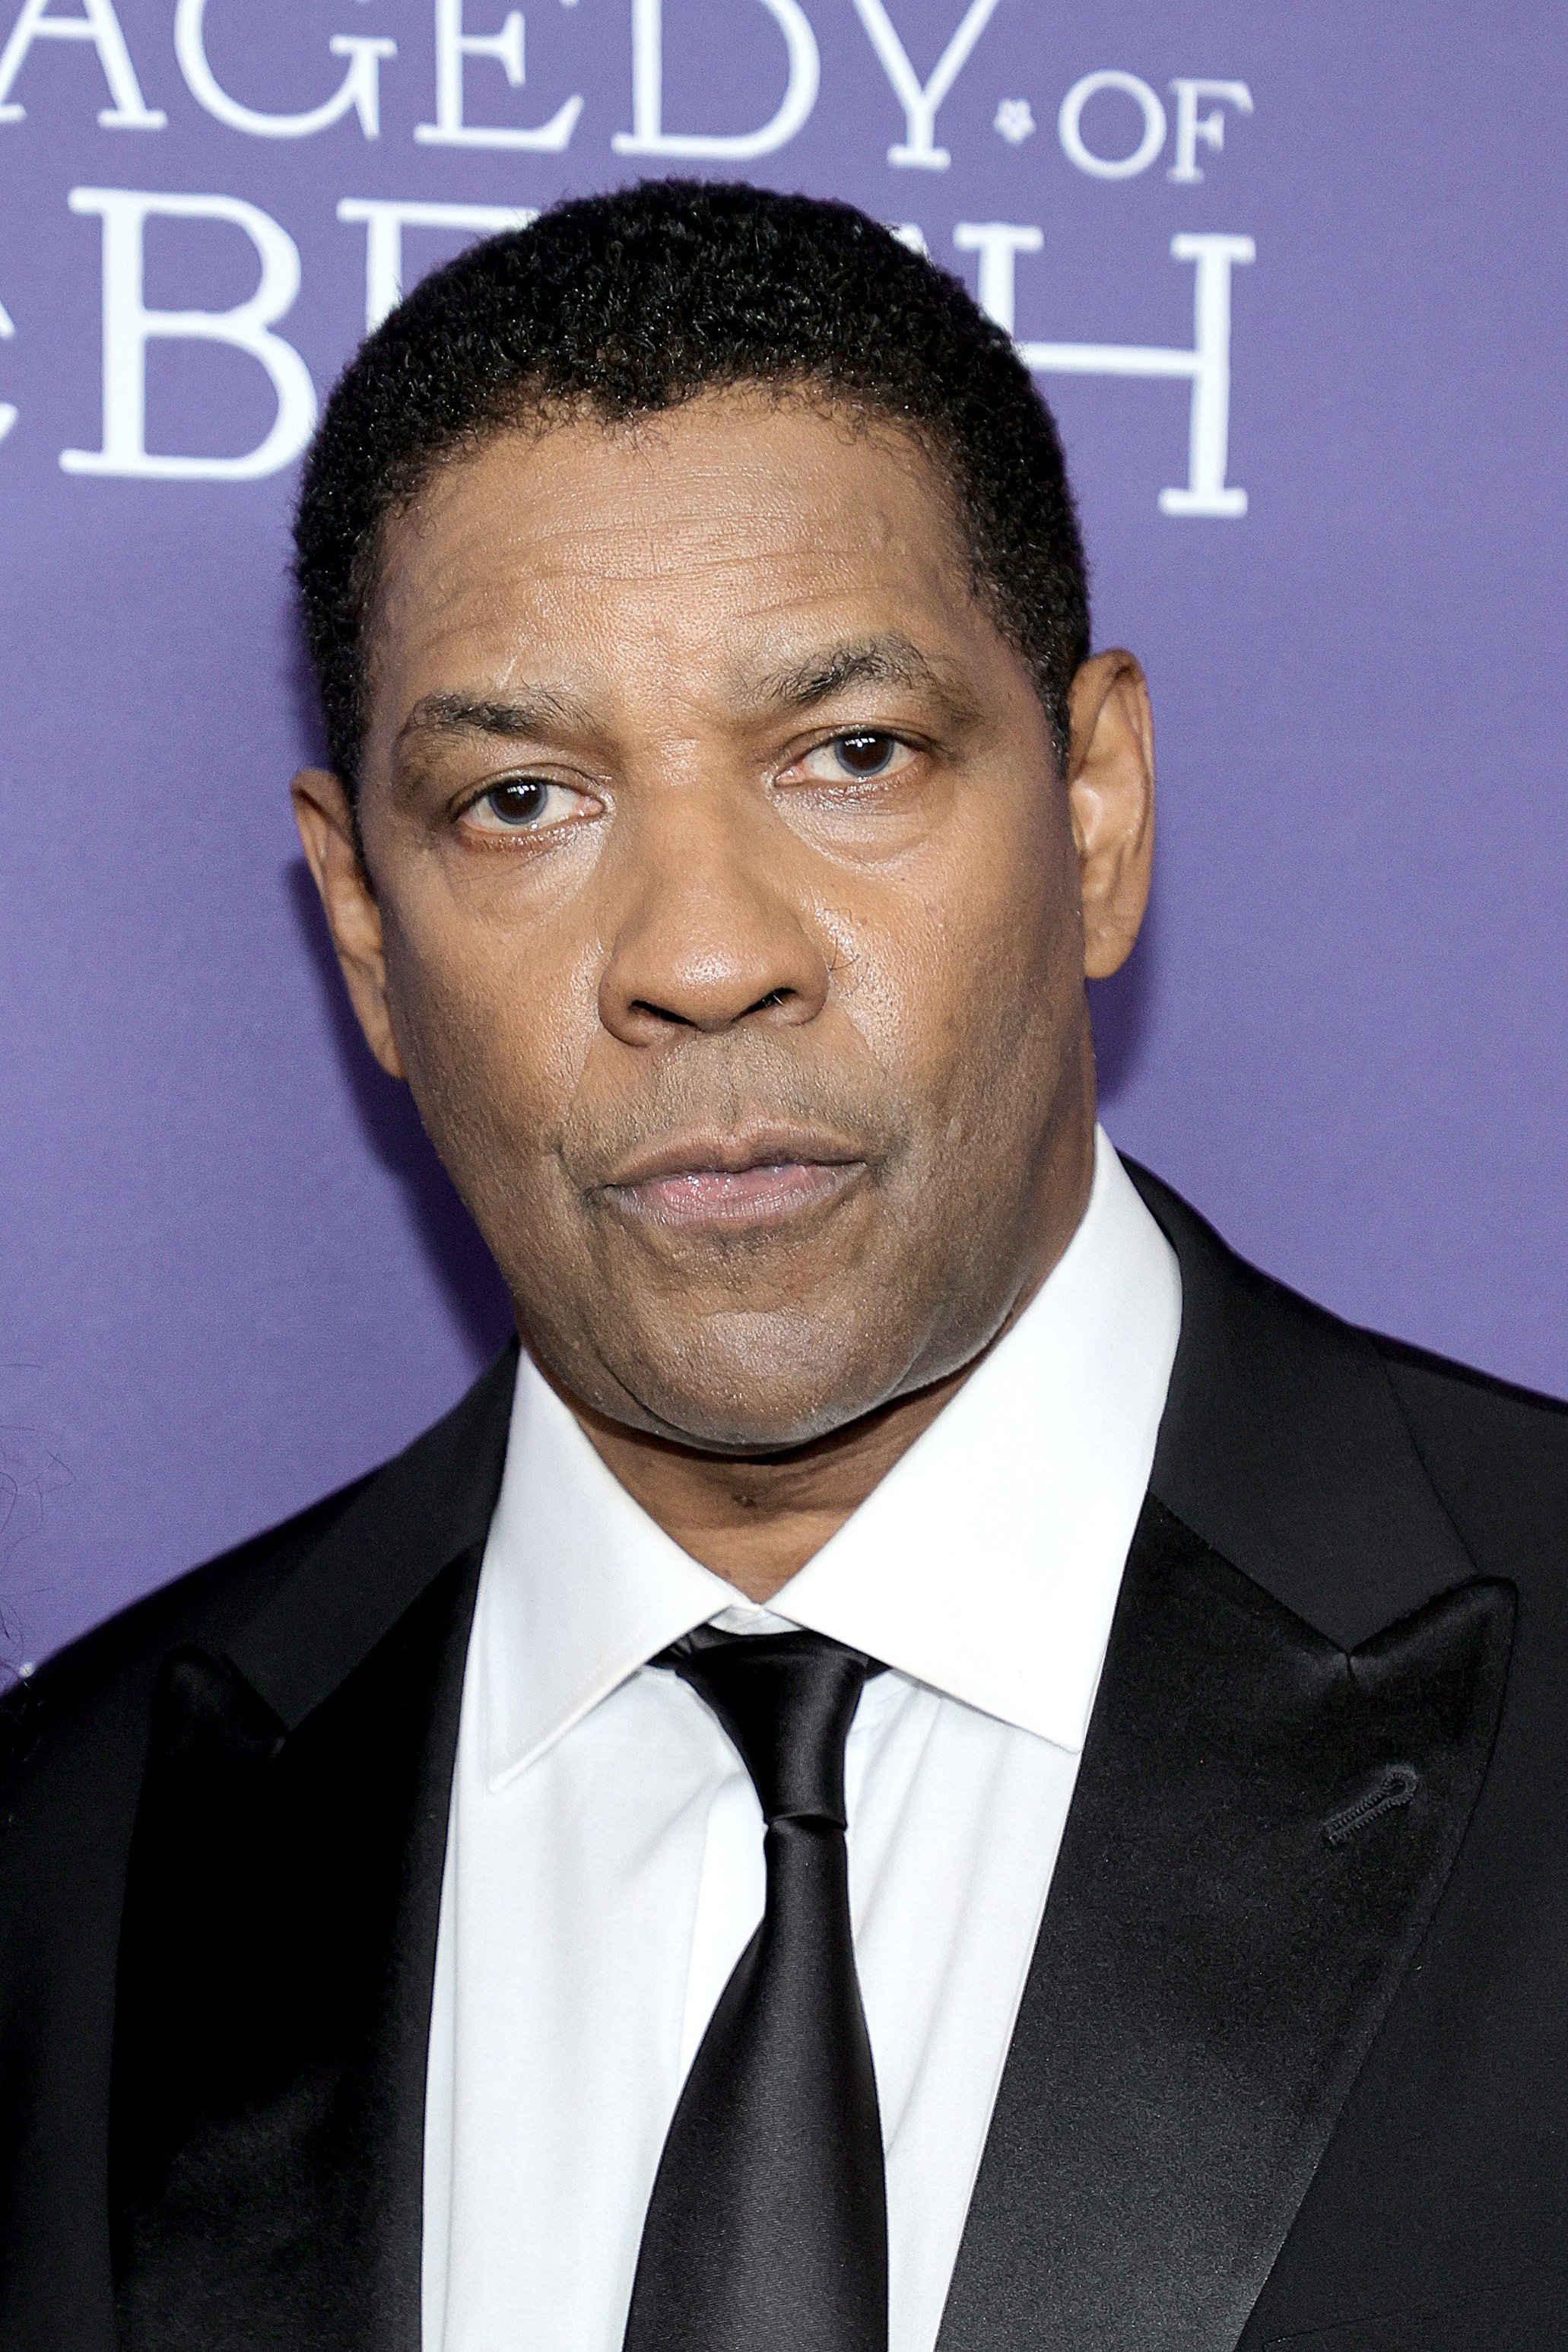 Denzel Washington attends the opening night screening of The Tragedy Of Macbeth during the 59th New York Film Festival at Alice Tully Hall, Lincoln Center, on September 24, 2021, in New York City. | Source: Getty Images